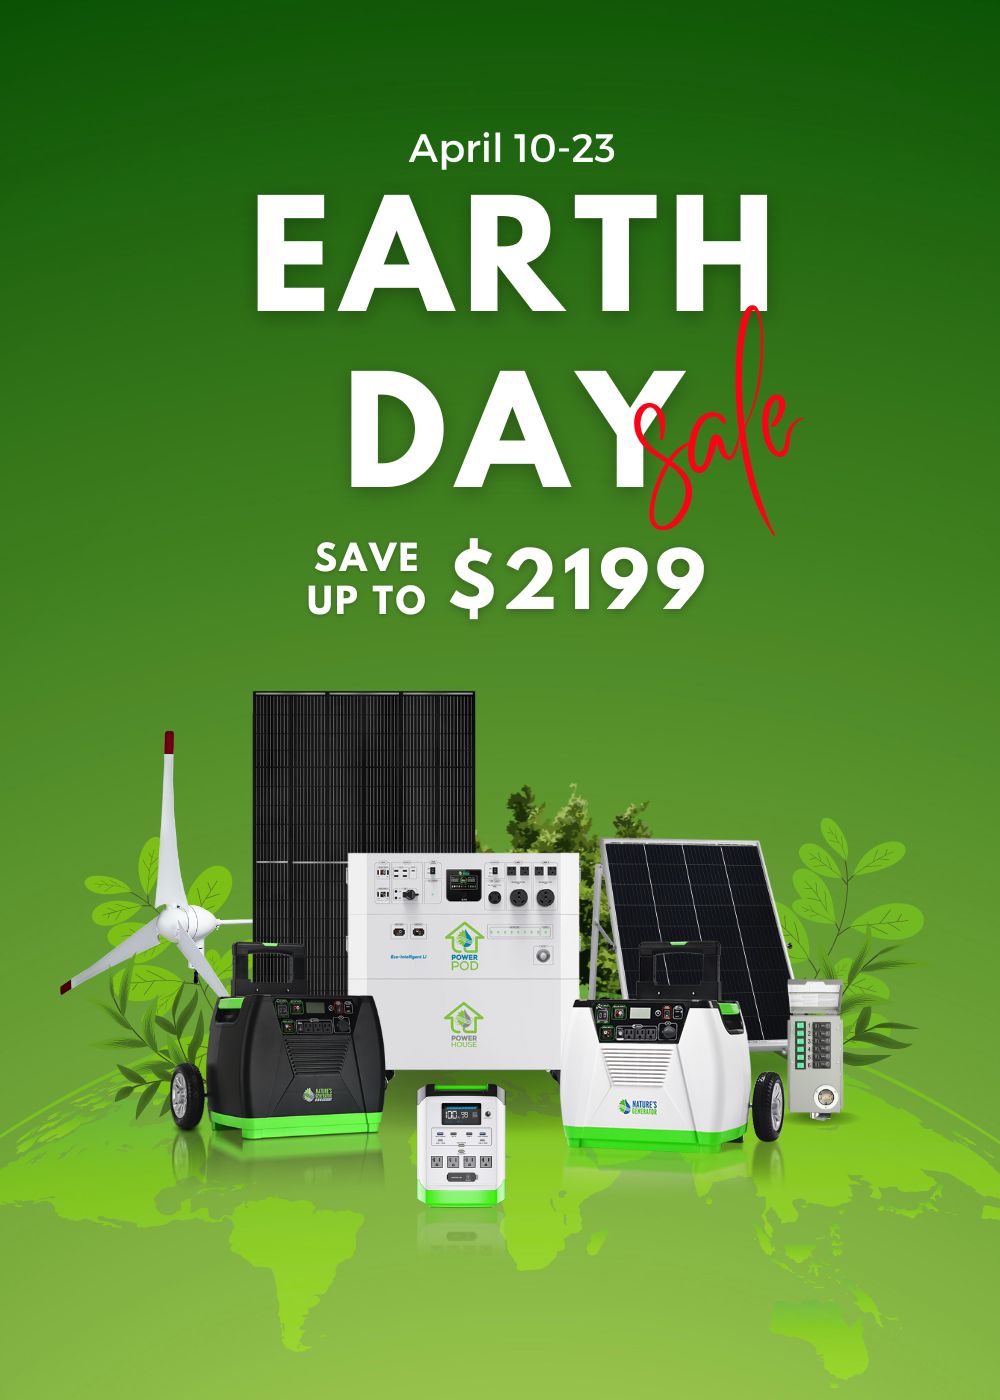 earth day sale mobile_1.jpg__PID:6eb8a718-f982-4f29-89a2-0b36cfcc67d9